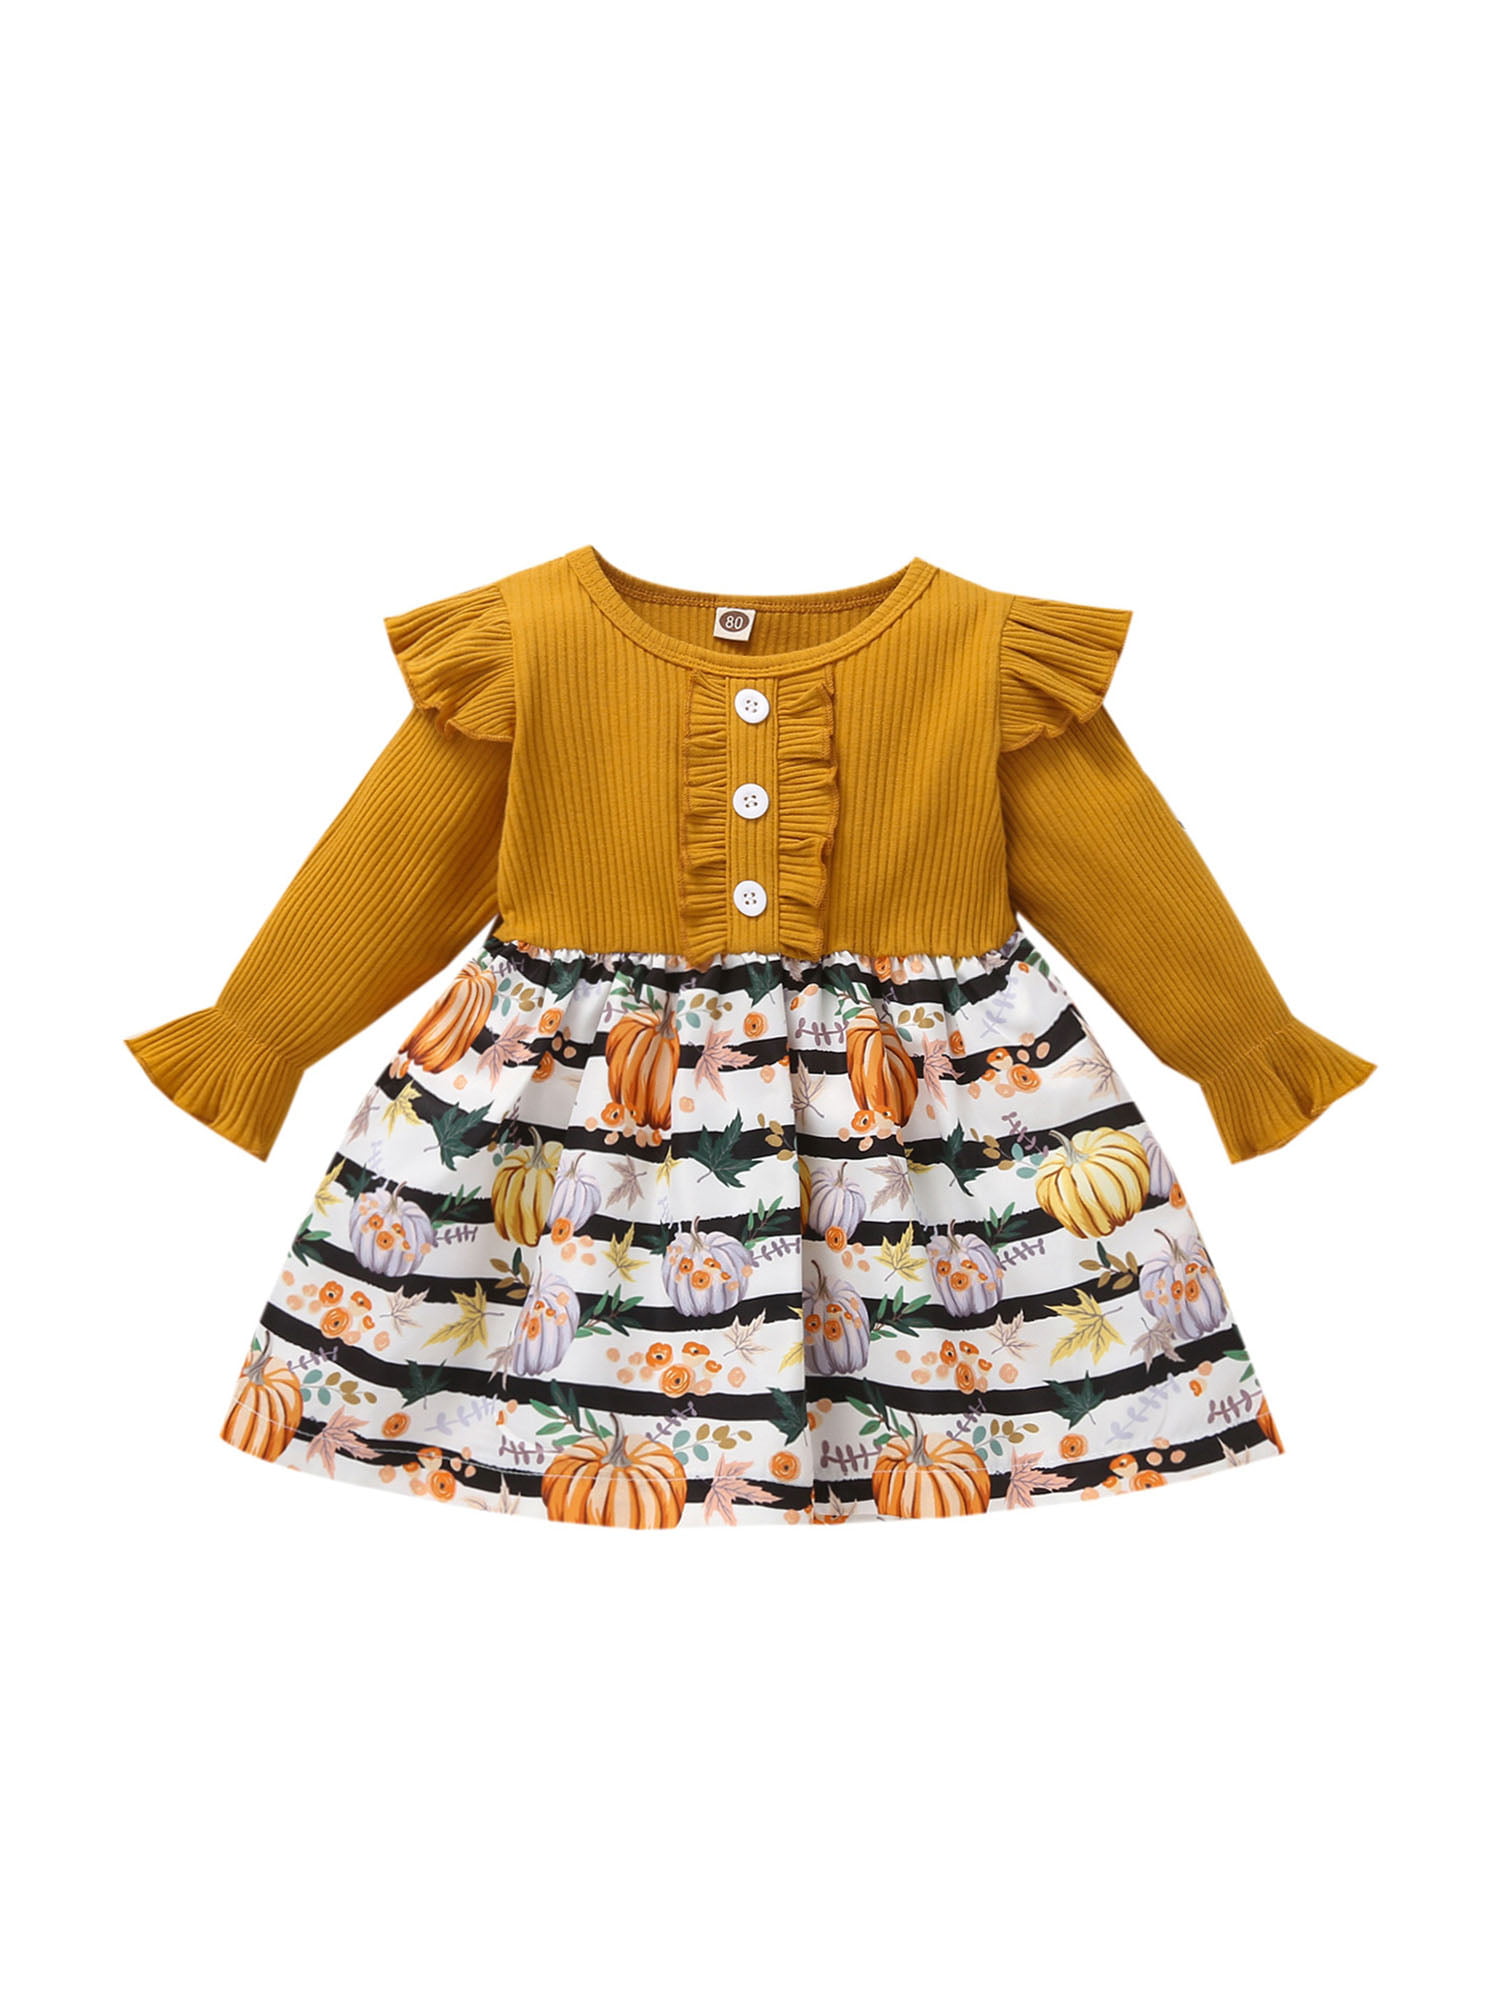 Details about   Toddler Baby Girls’ Long-sleeved Plaid Elastic Waist Dress Round Neck Outfits 